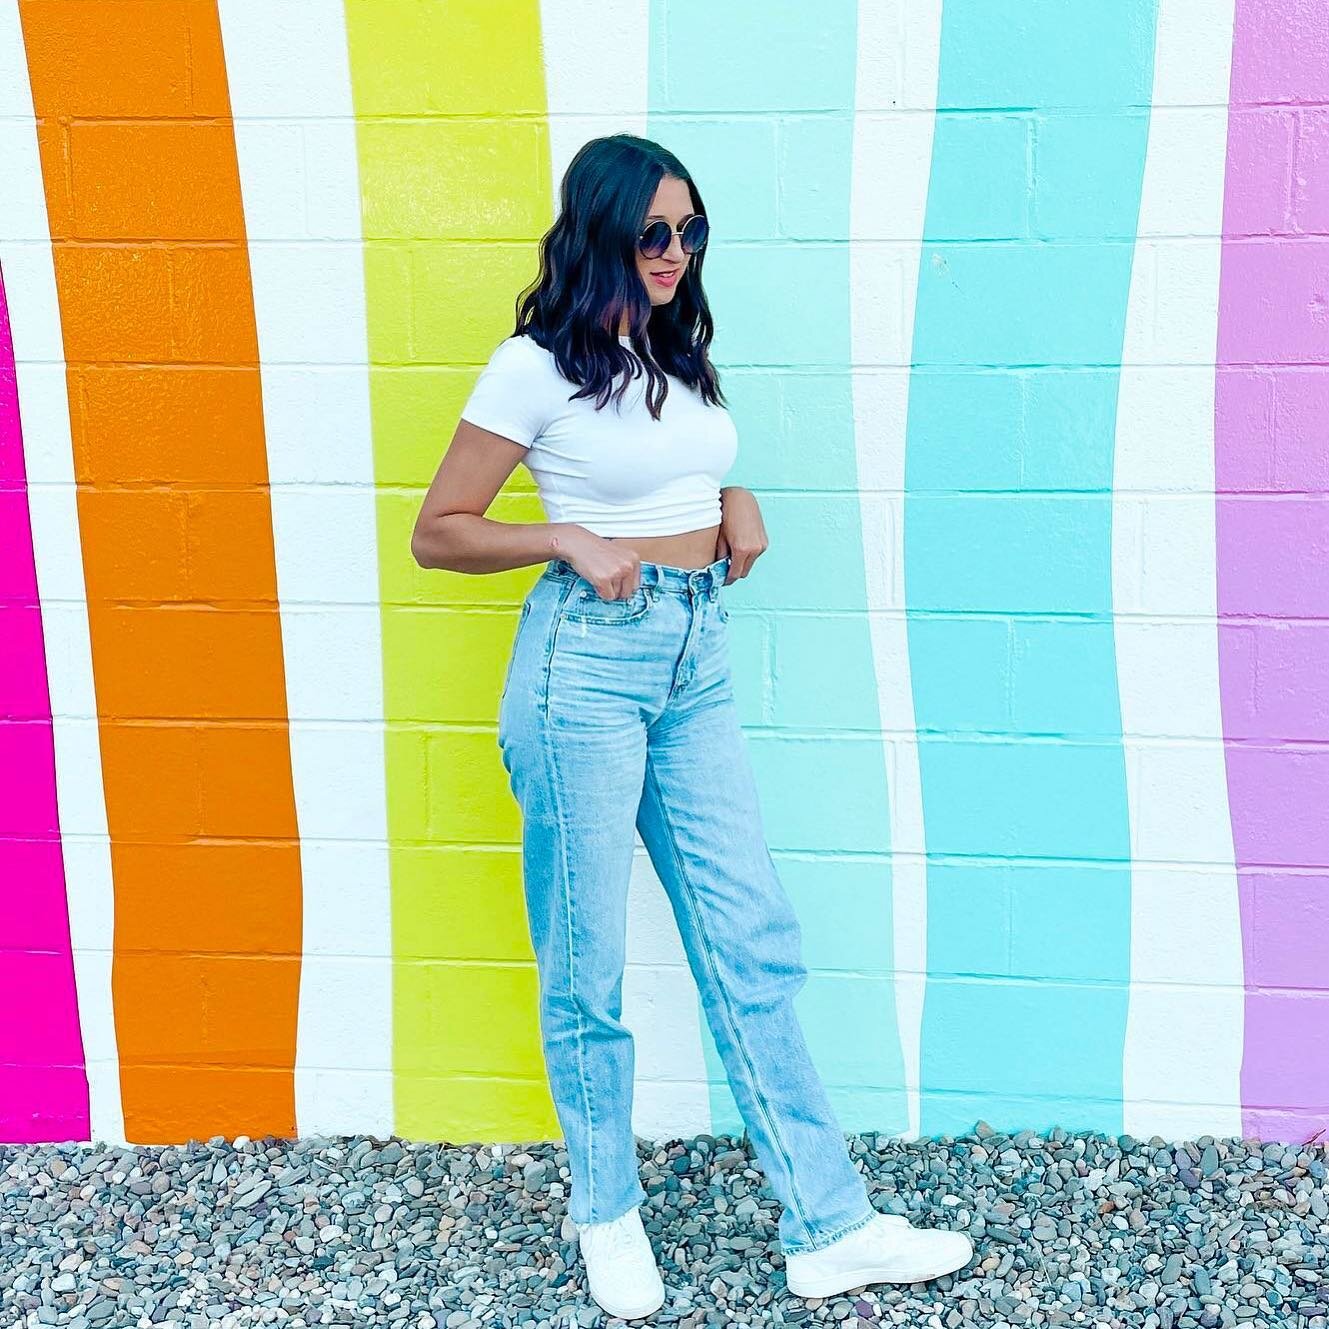 We love walls with pizzazz &amp; color. 🧡💛💚💙💜

Stop by @allshewrotenotesstudio every first Saturday (Sept 3rd!) for a bit of shopping 🛍 followed by a cute selfie or two. 🤳🏼

📸: @surratt_holly